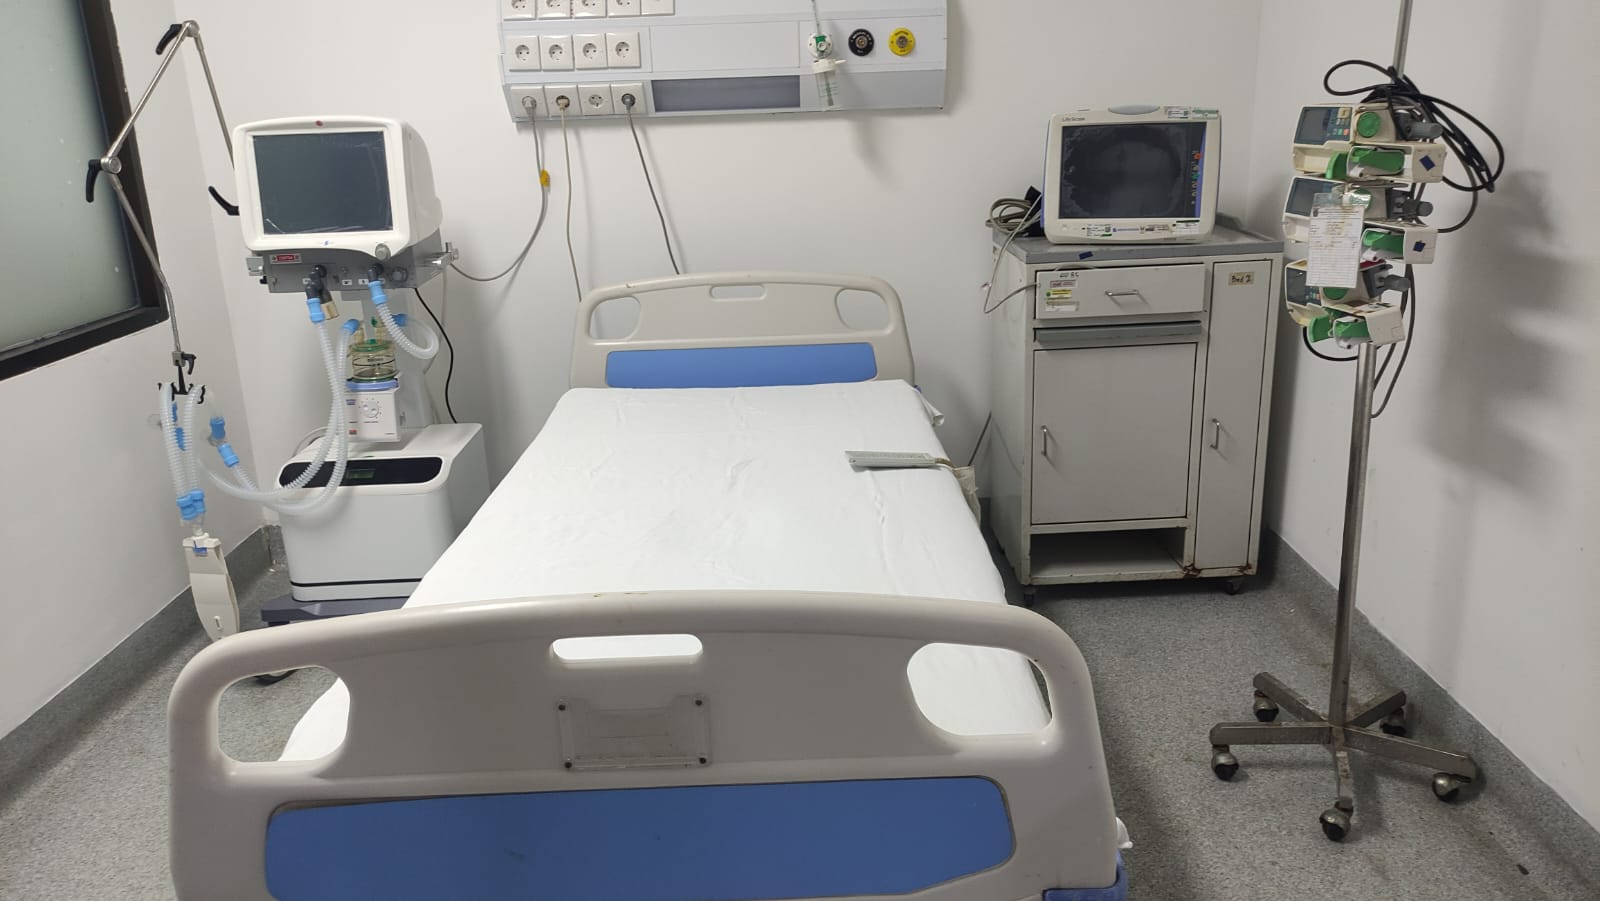 The ventilator installed in one of the hospital rooms